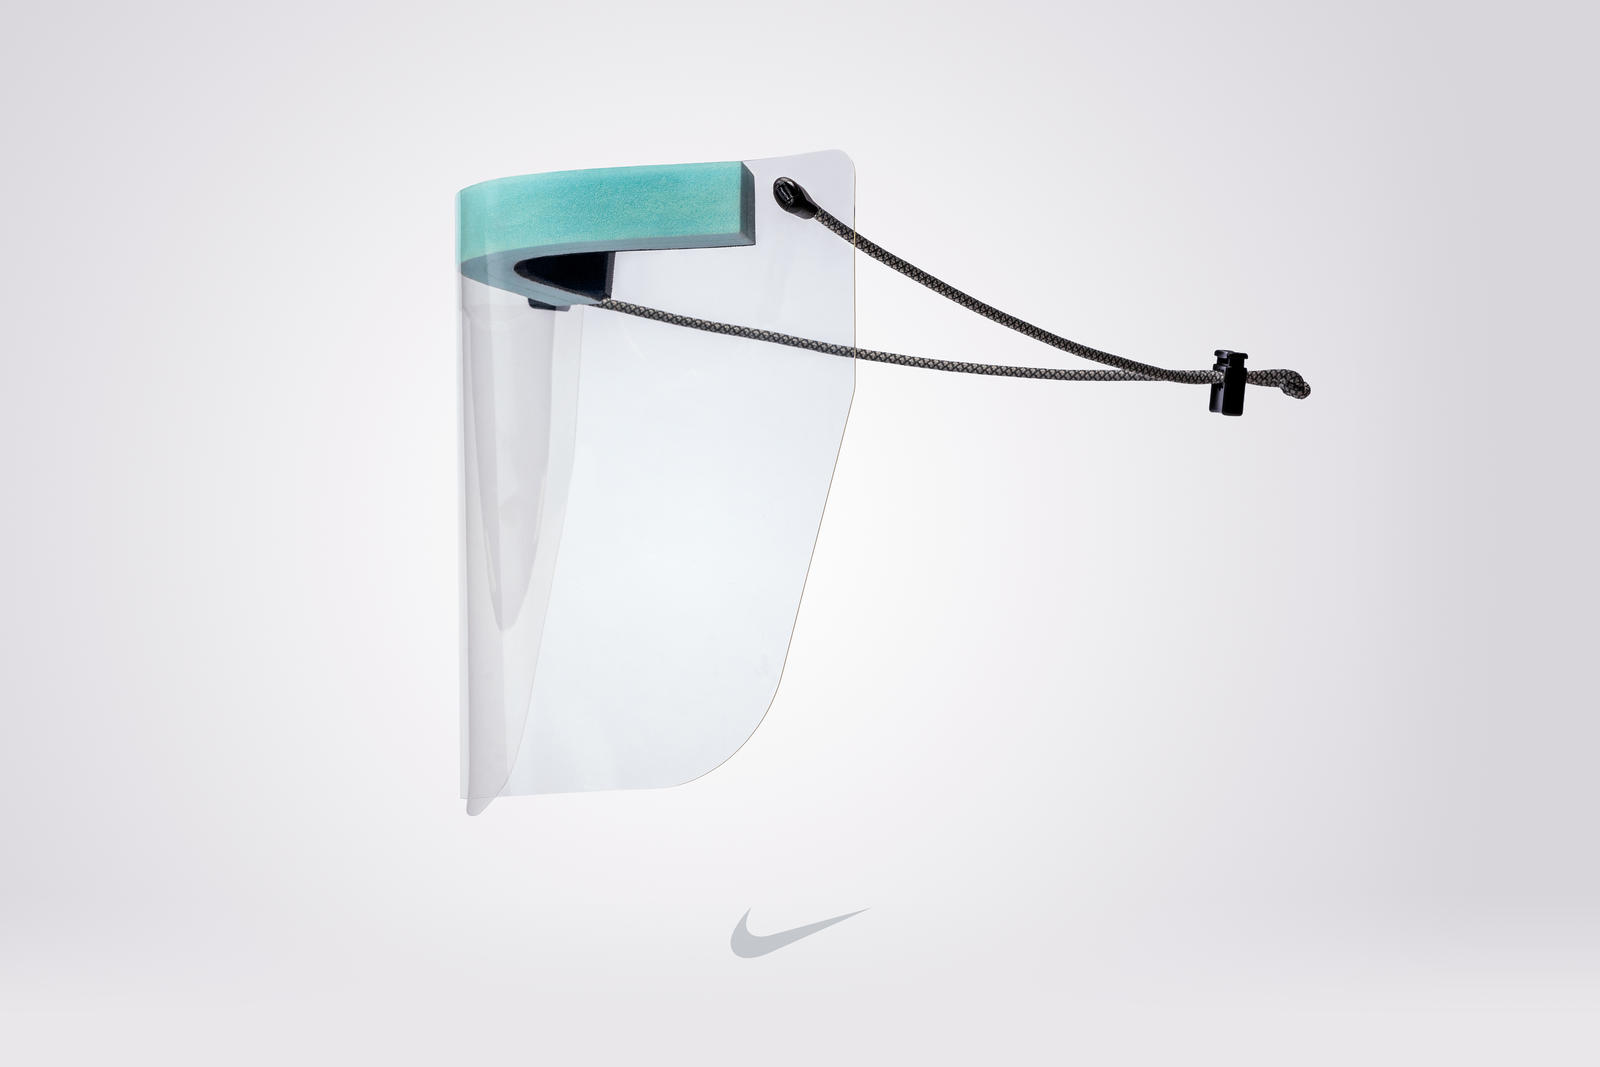 Nike turns Nike Air into PPE 